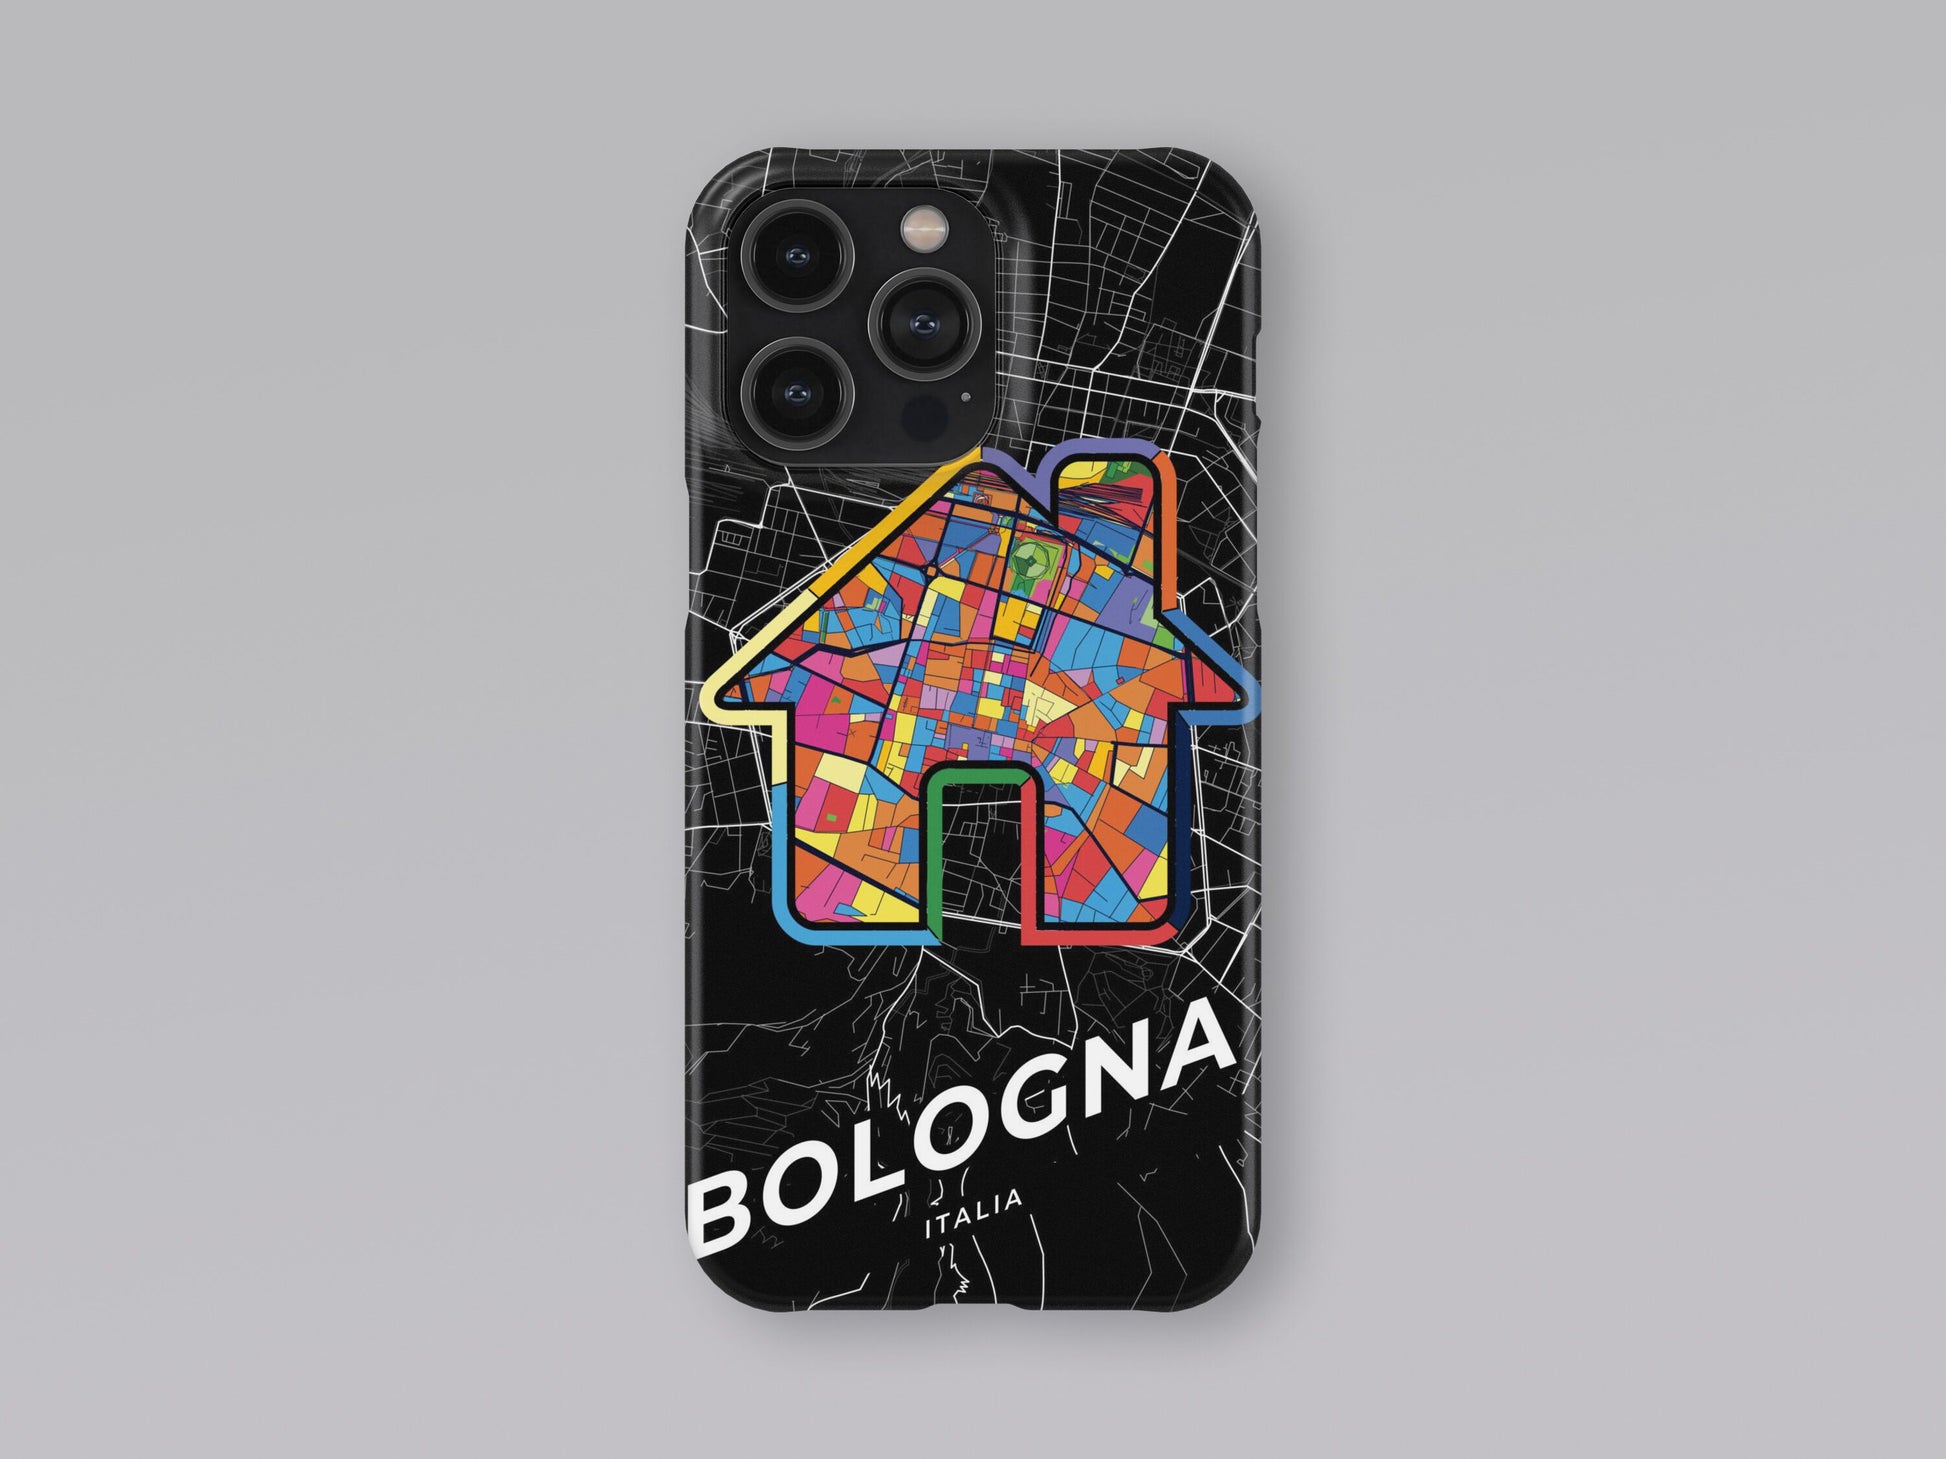 Bologna Italy slim phone case with colorful icon. Birthday, wedding or housewarming gift. Couple match cases. 3